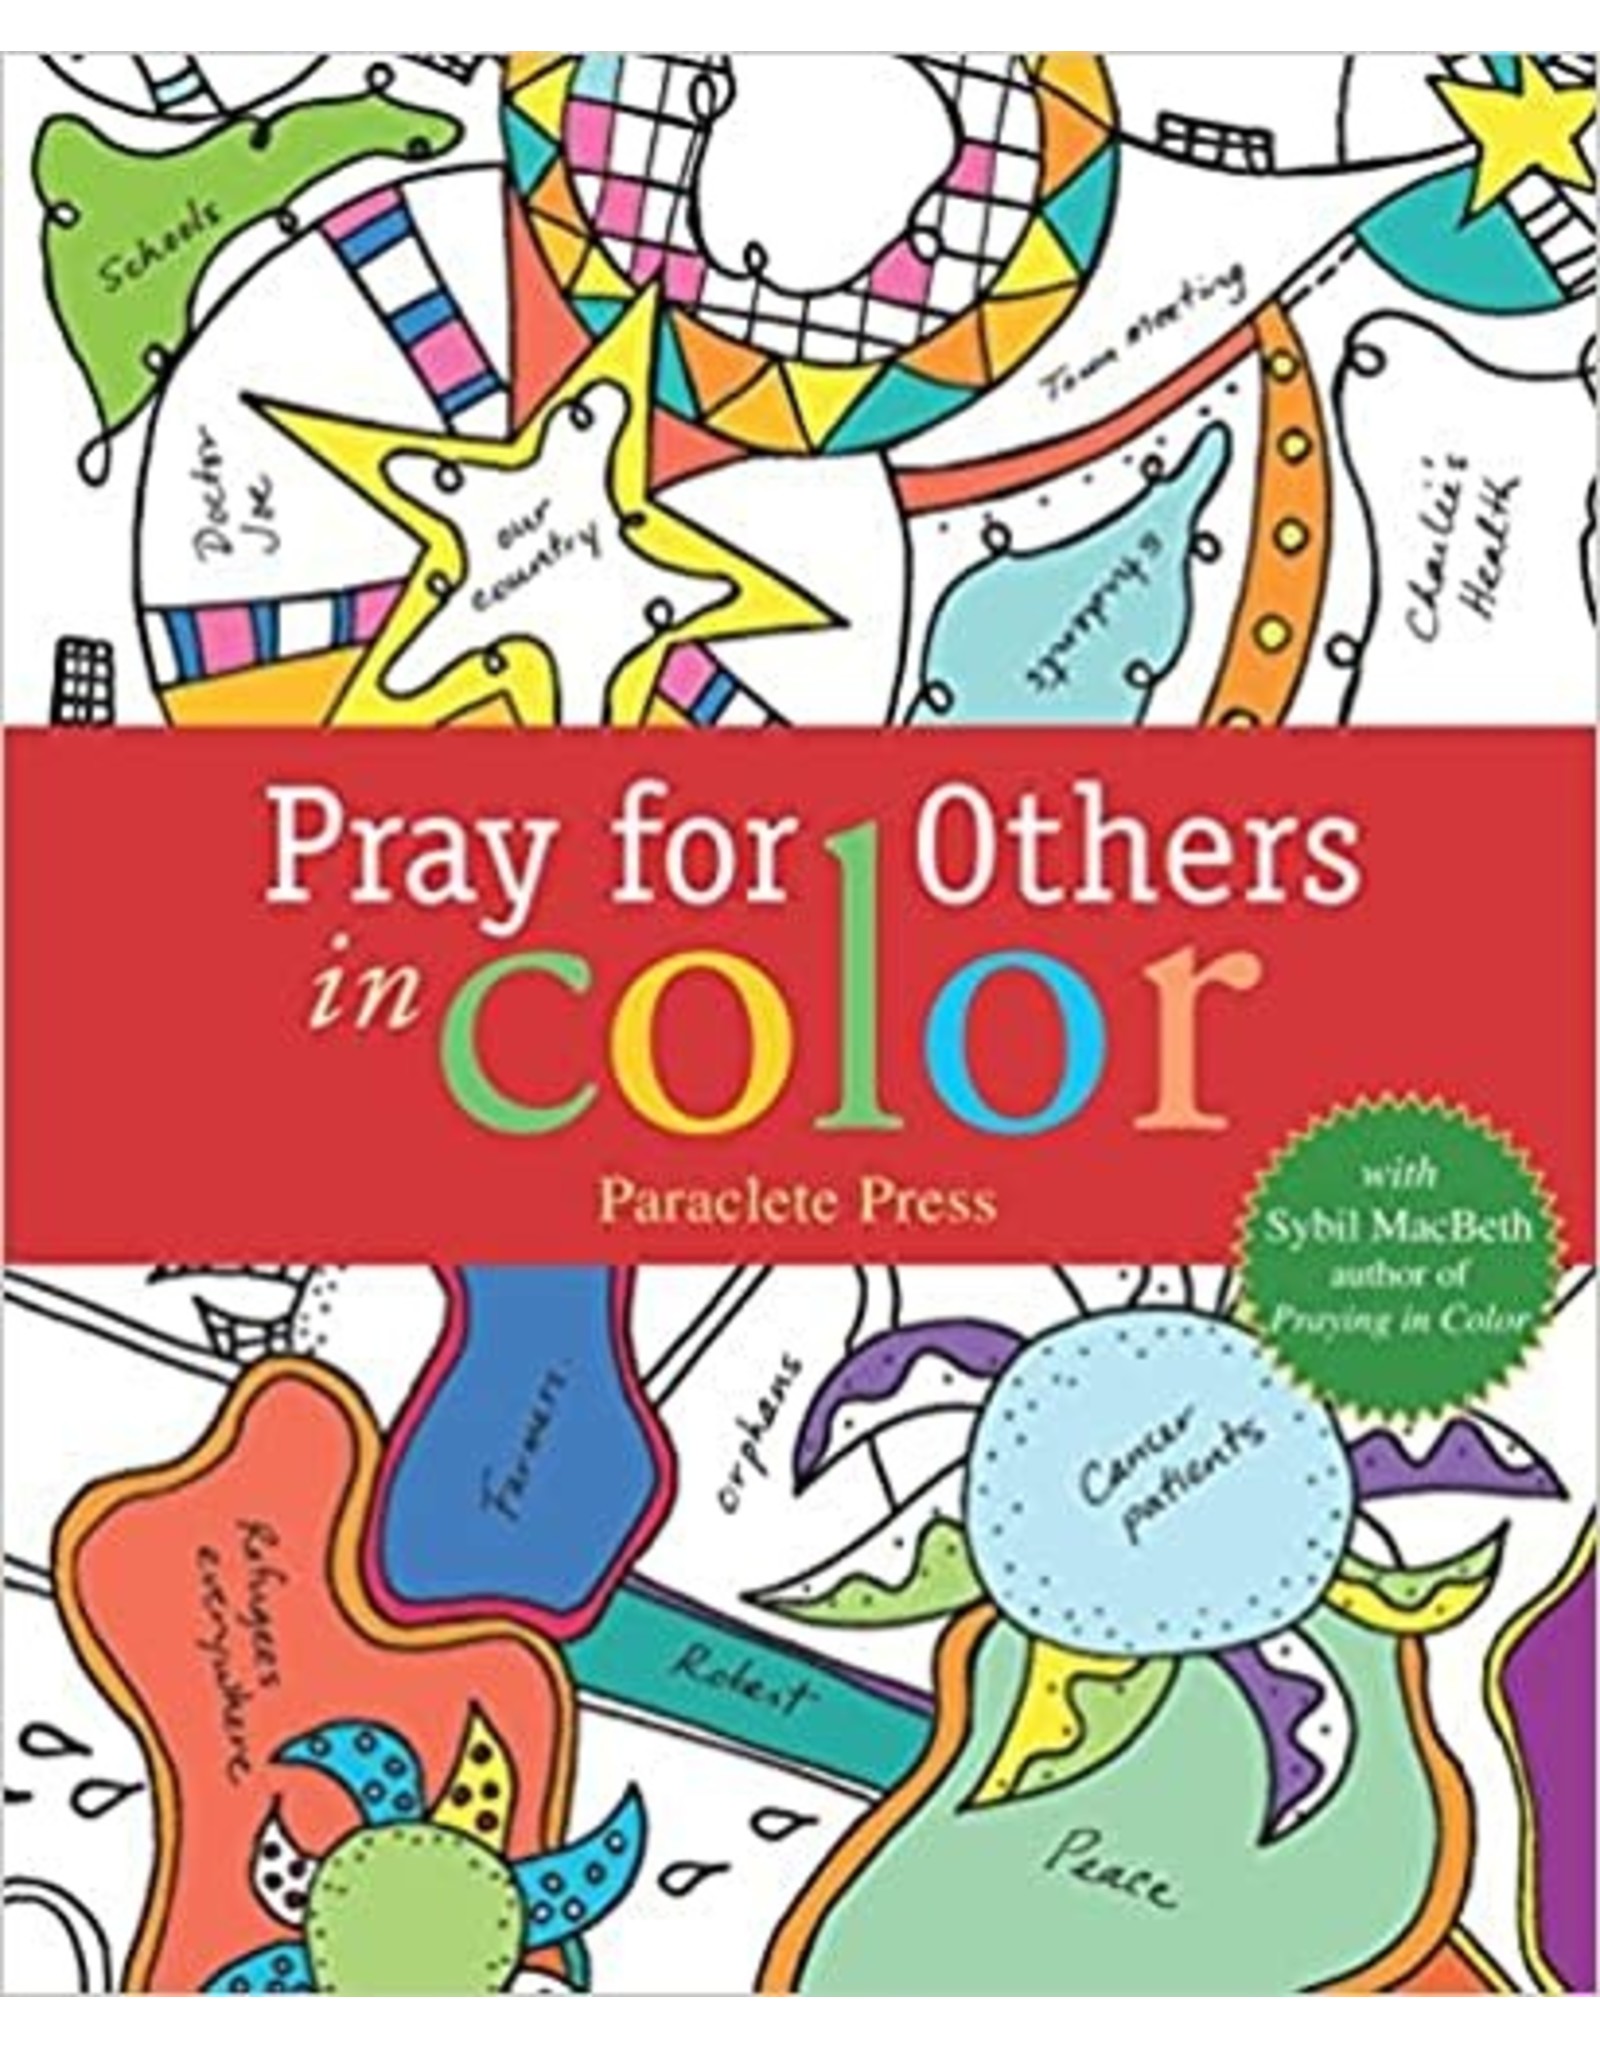 Paraclete Press Praying for Others in Color with Sybil MacBeth